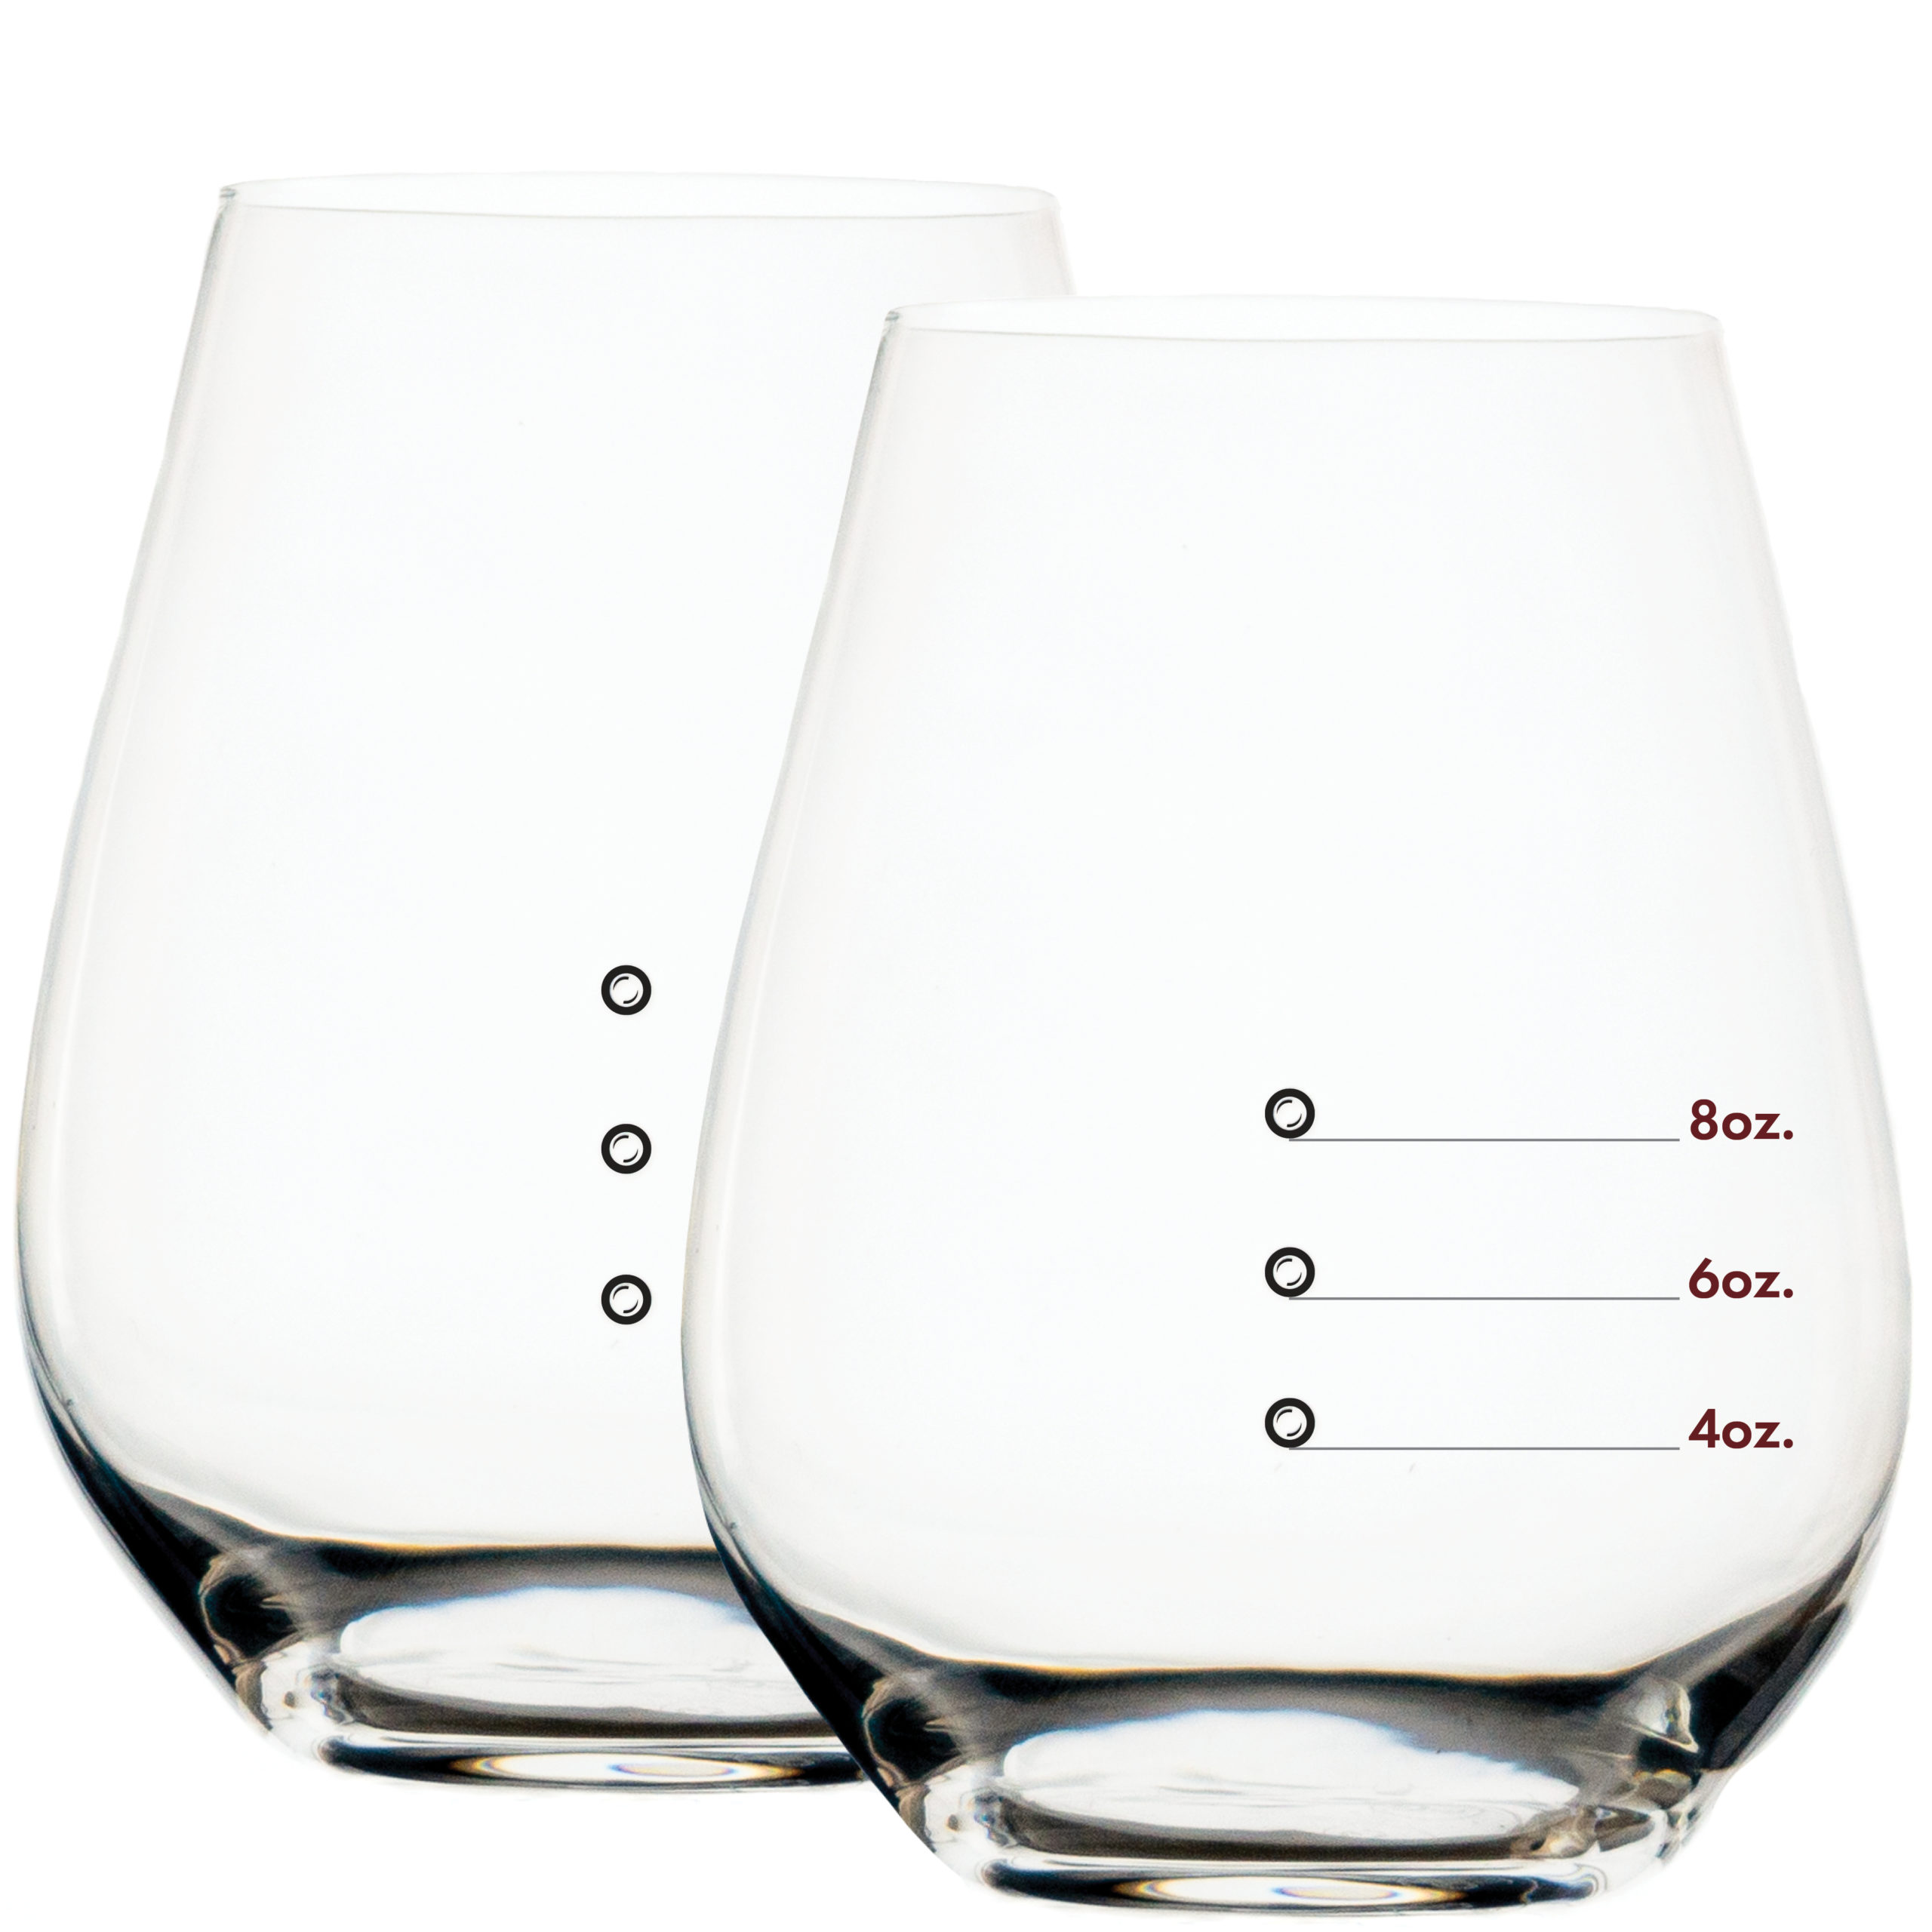 Sold as One Glass Discrete Markings of 4 oz Guiding Lines Portion Control Tempered Glass for Blood Sugar Level Control Stylish 10 oz Beverage Drinking Glass